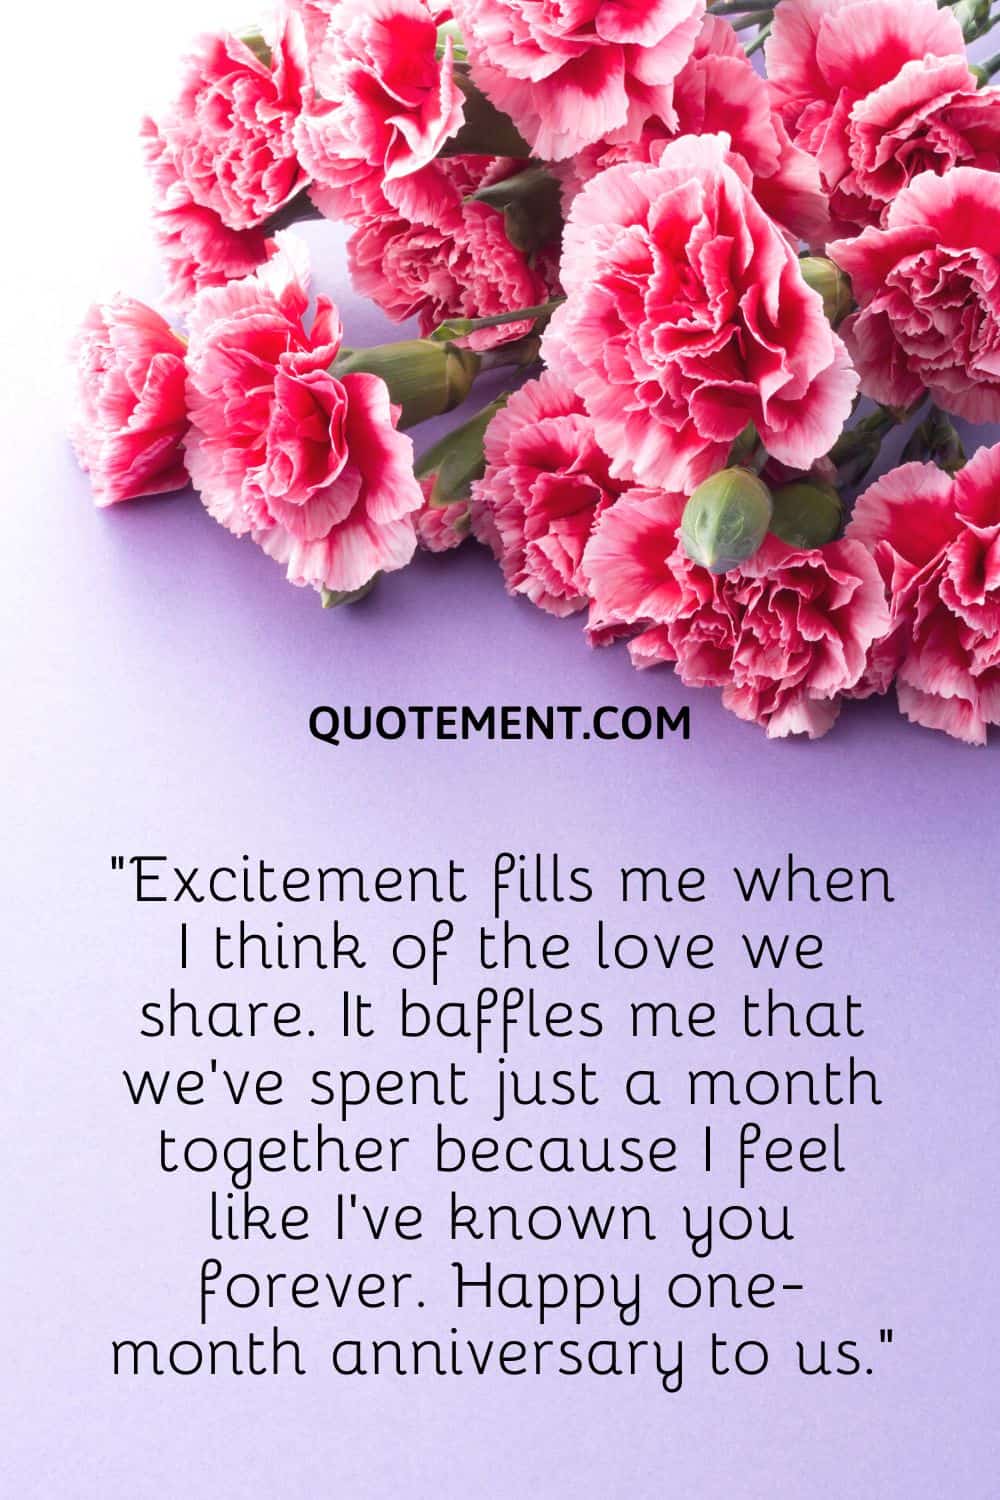 Excitement fills me when I think of the love we share